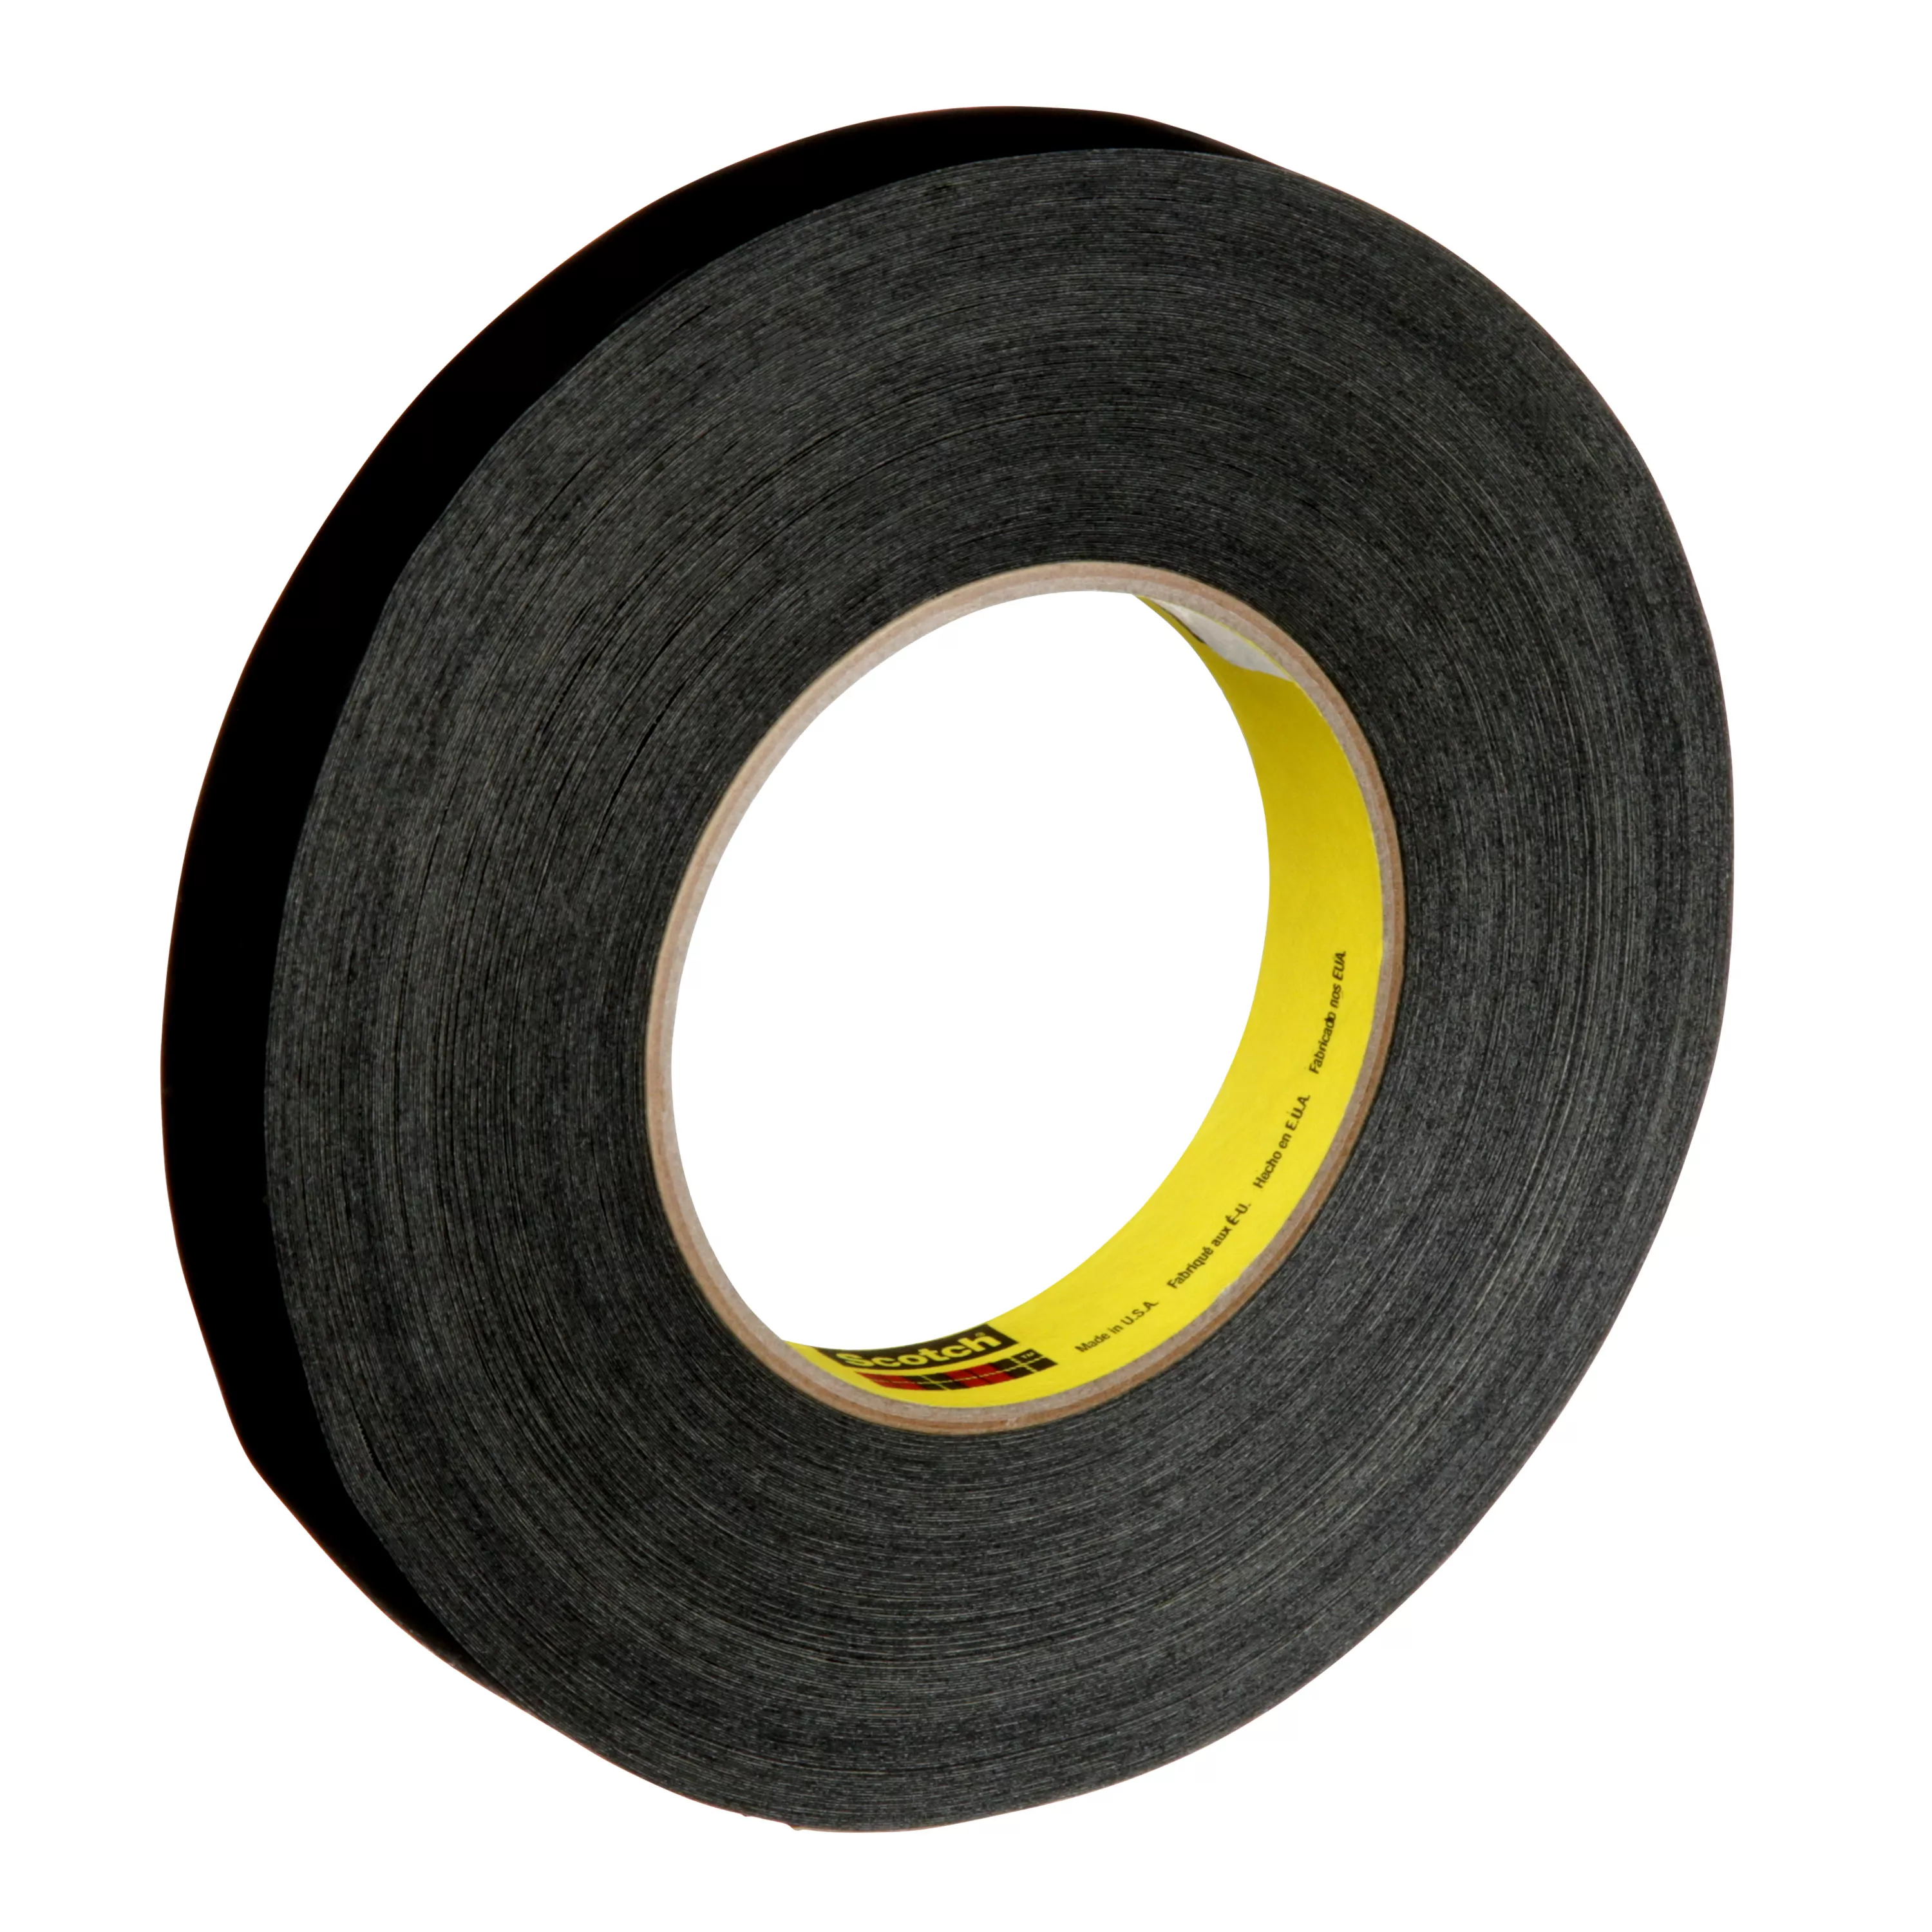 Scotch® Solvent Resistant Masking Tape 226, Black, 3/4 in x 60 yd, 10.6
mil, 48/Case